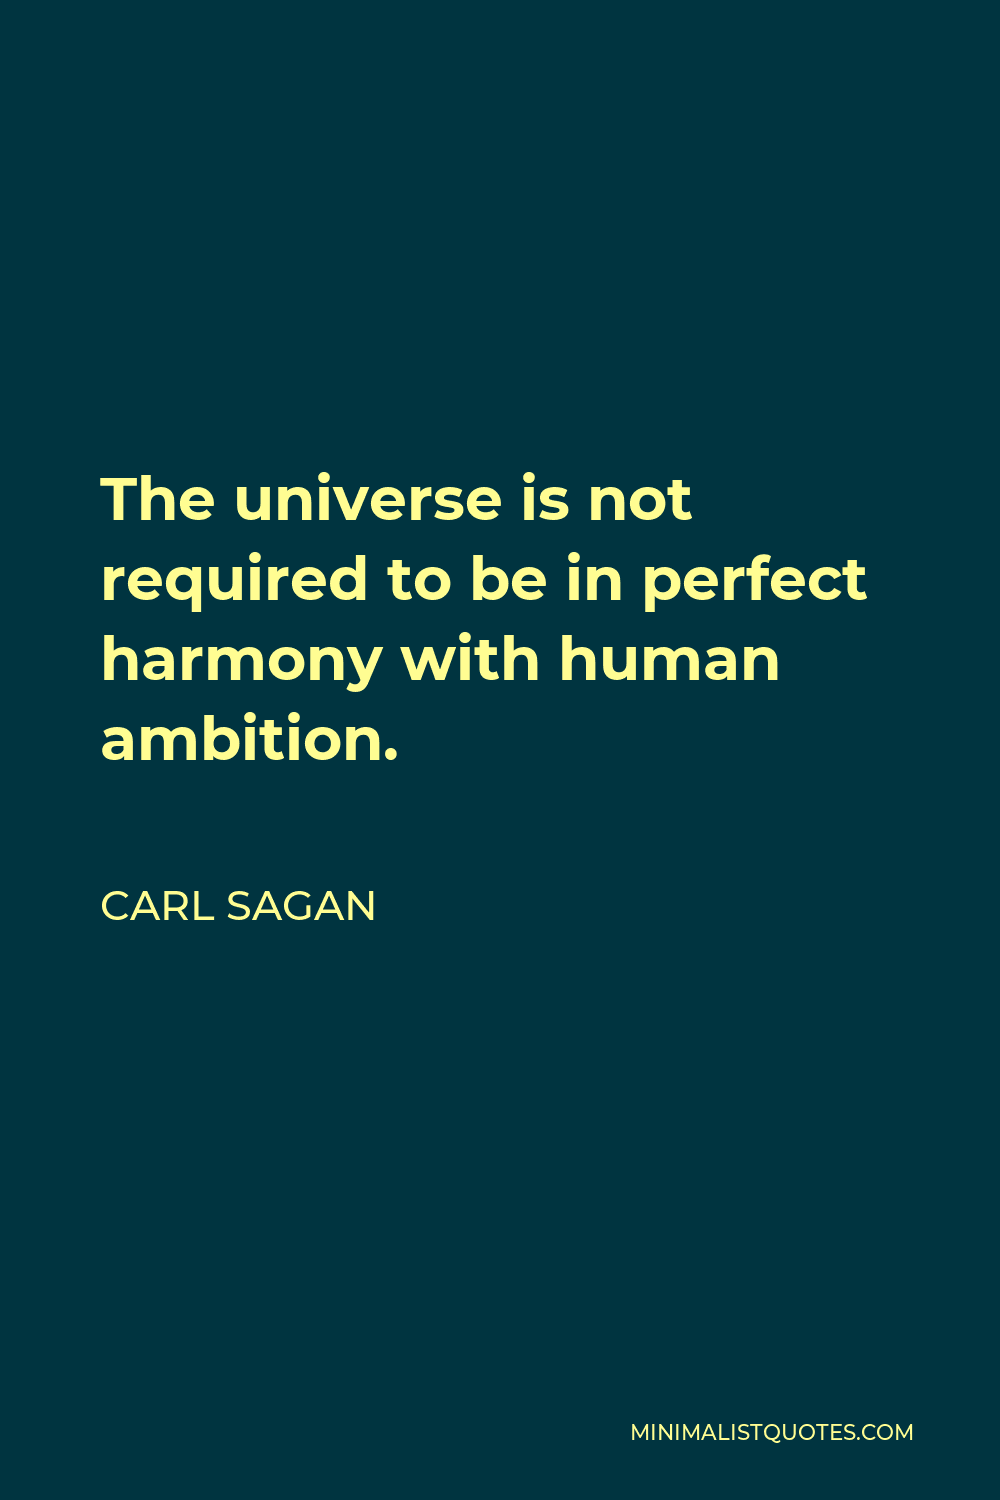 Carl Sagan Quote: The universe is not required to be in perfect harmony ...